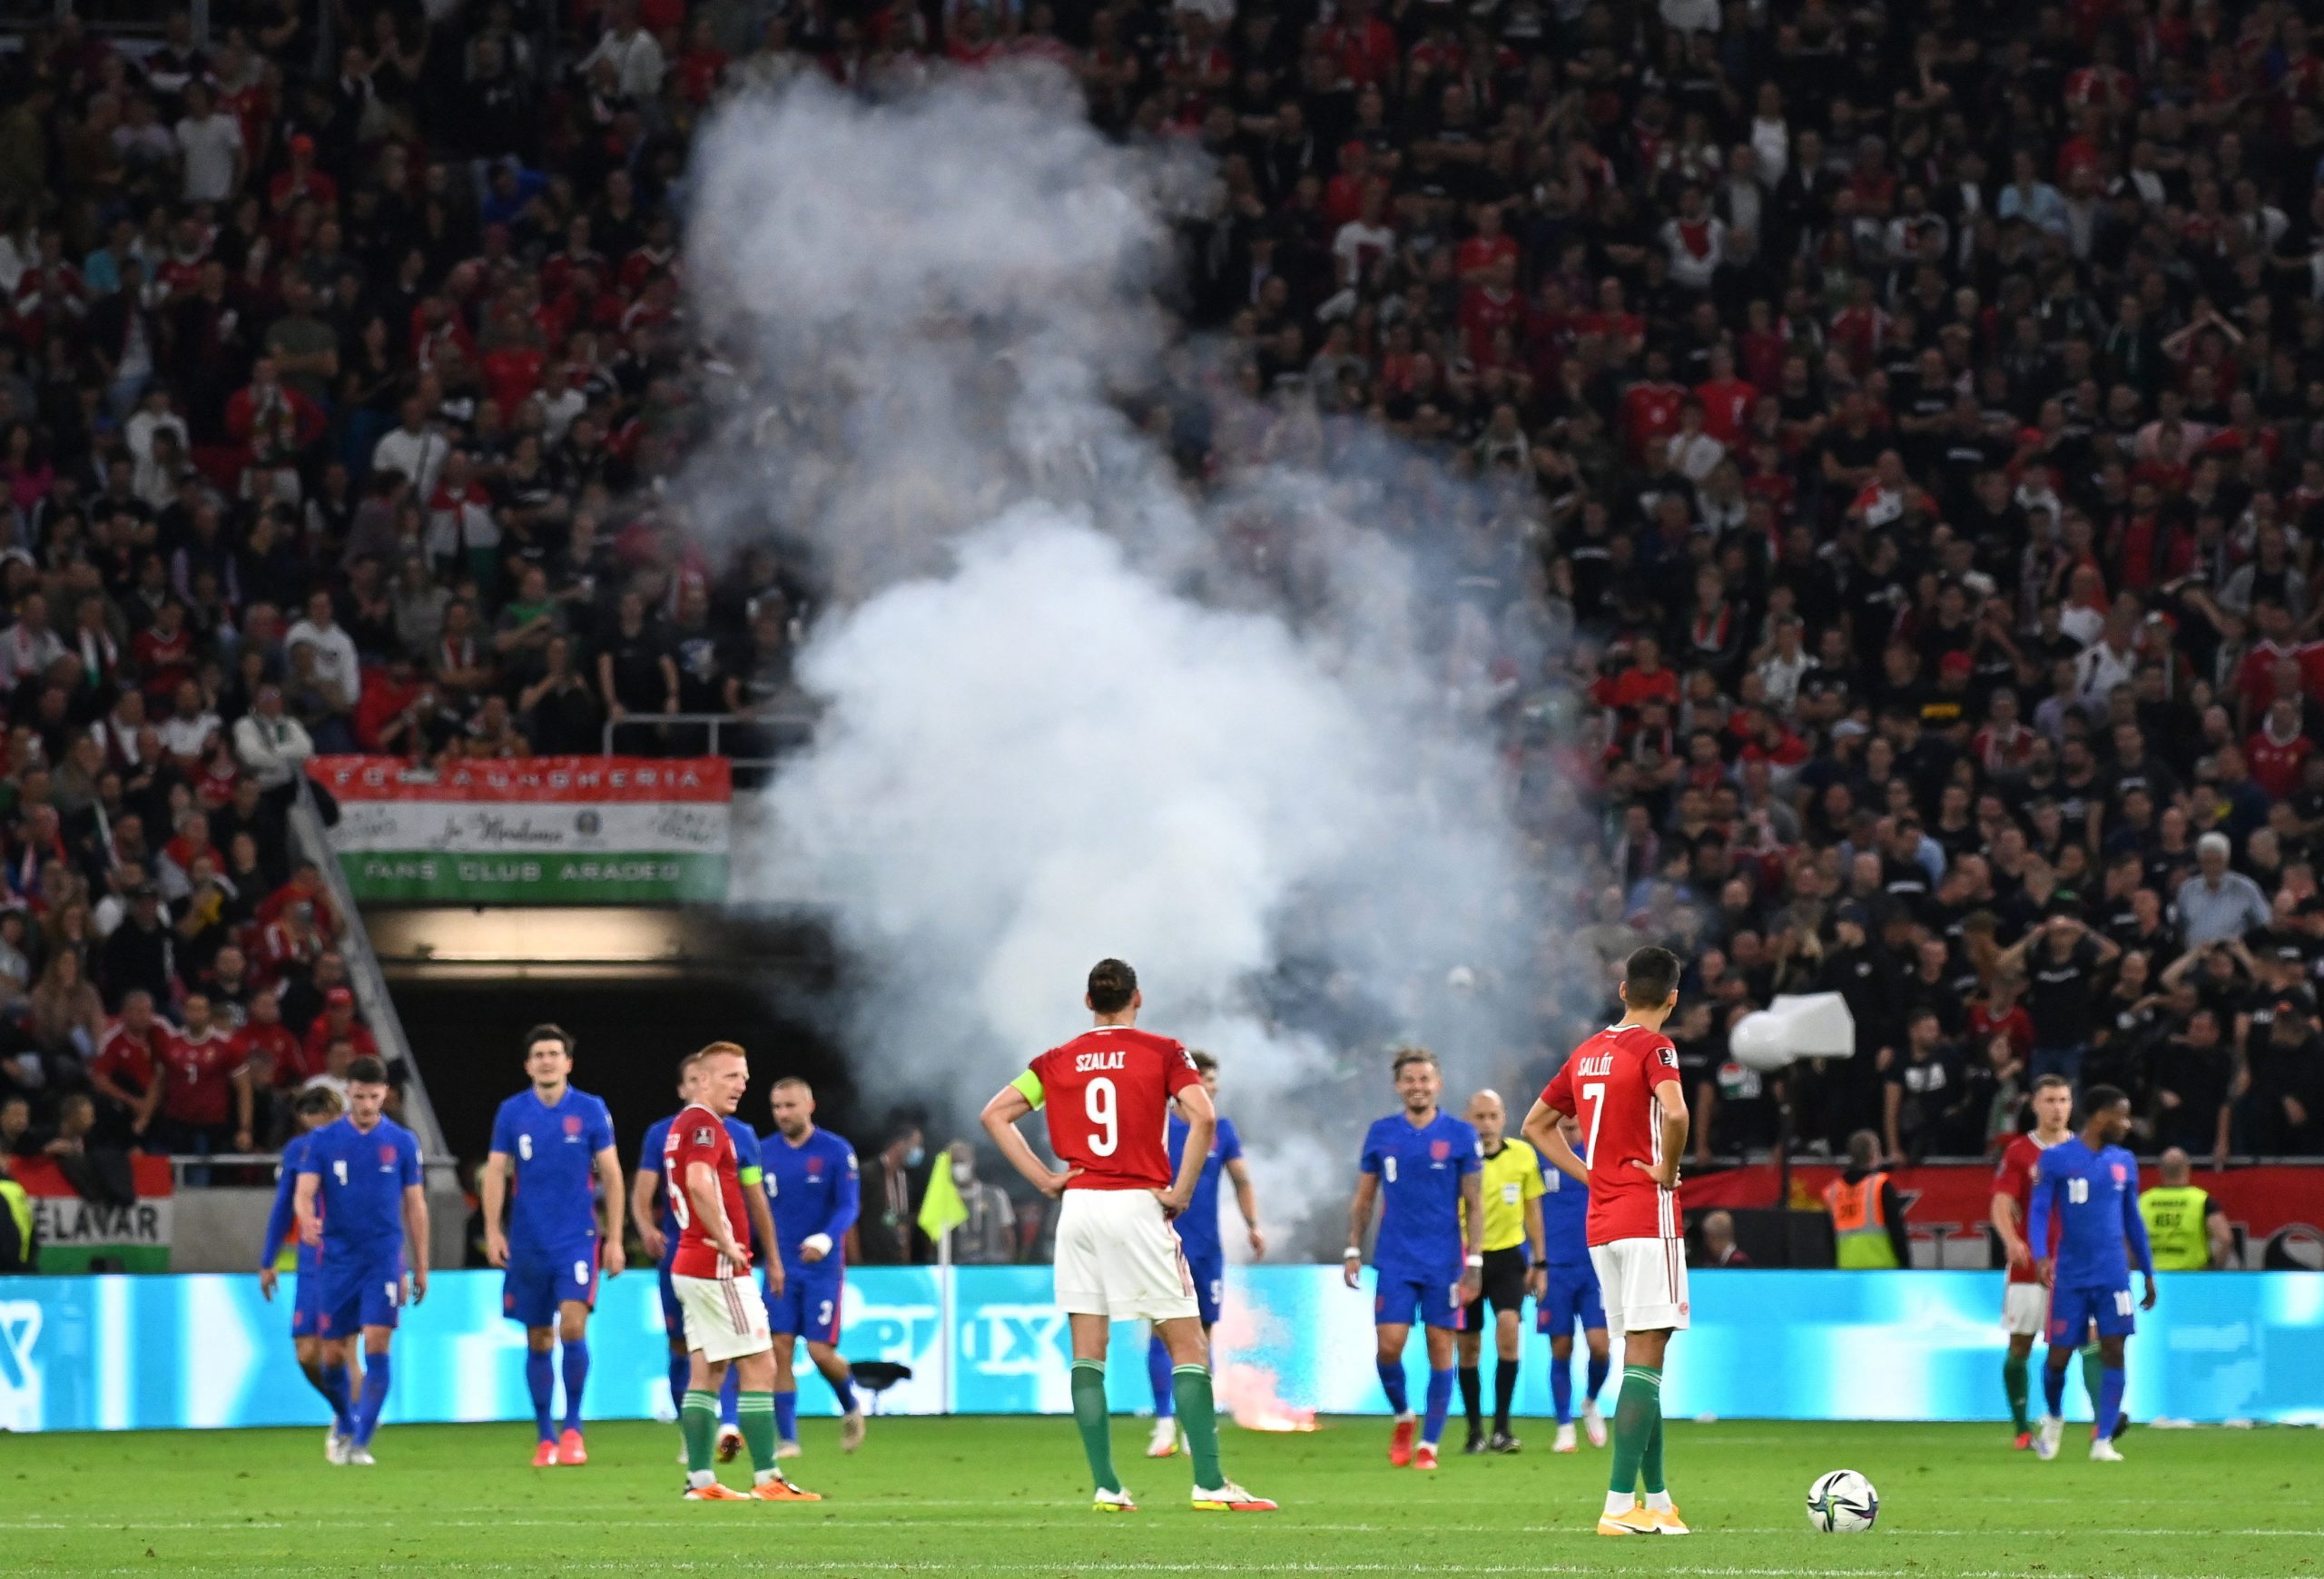 Hungary to Play Next WC Qualifier Behind Closed Doors after Racist Incidents in England Match